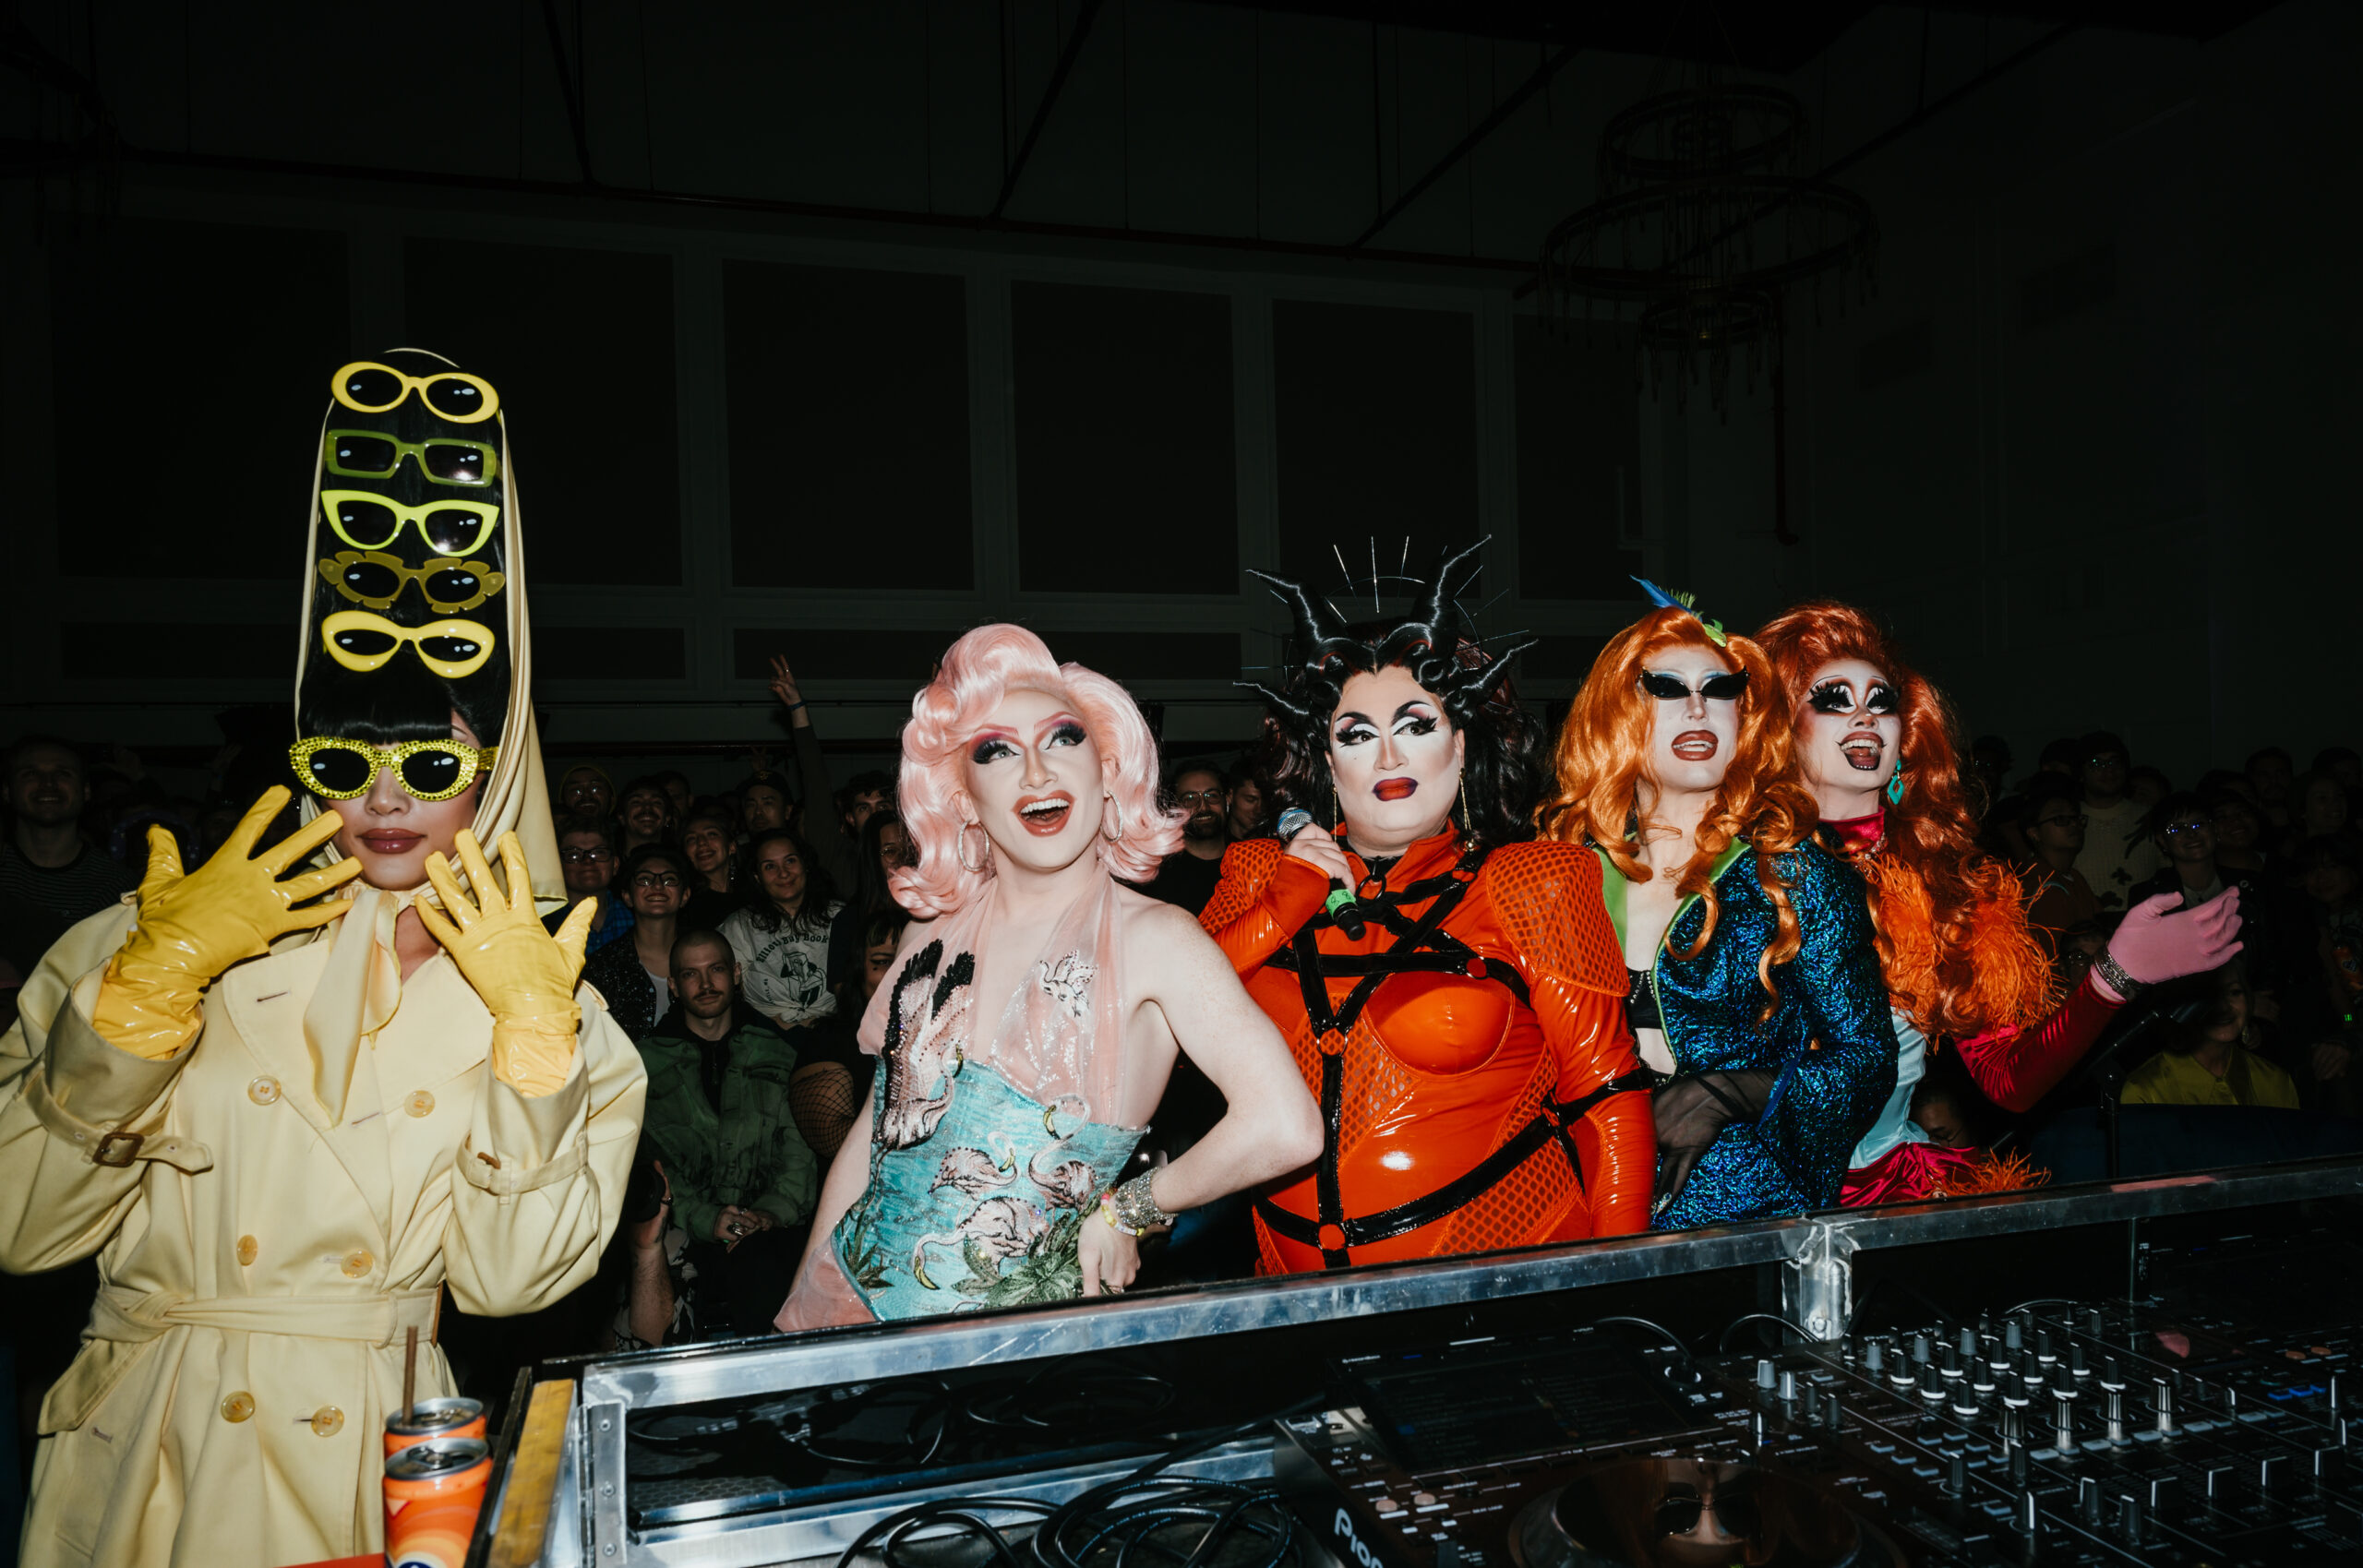 Visit the The Werk Room: Drag Race Finale Viewing Party event page